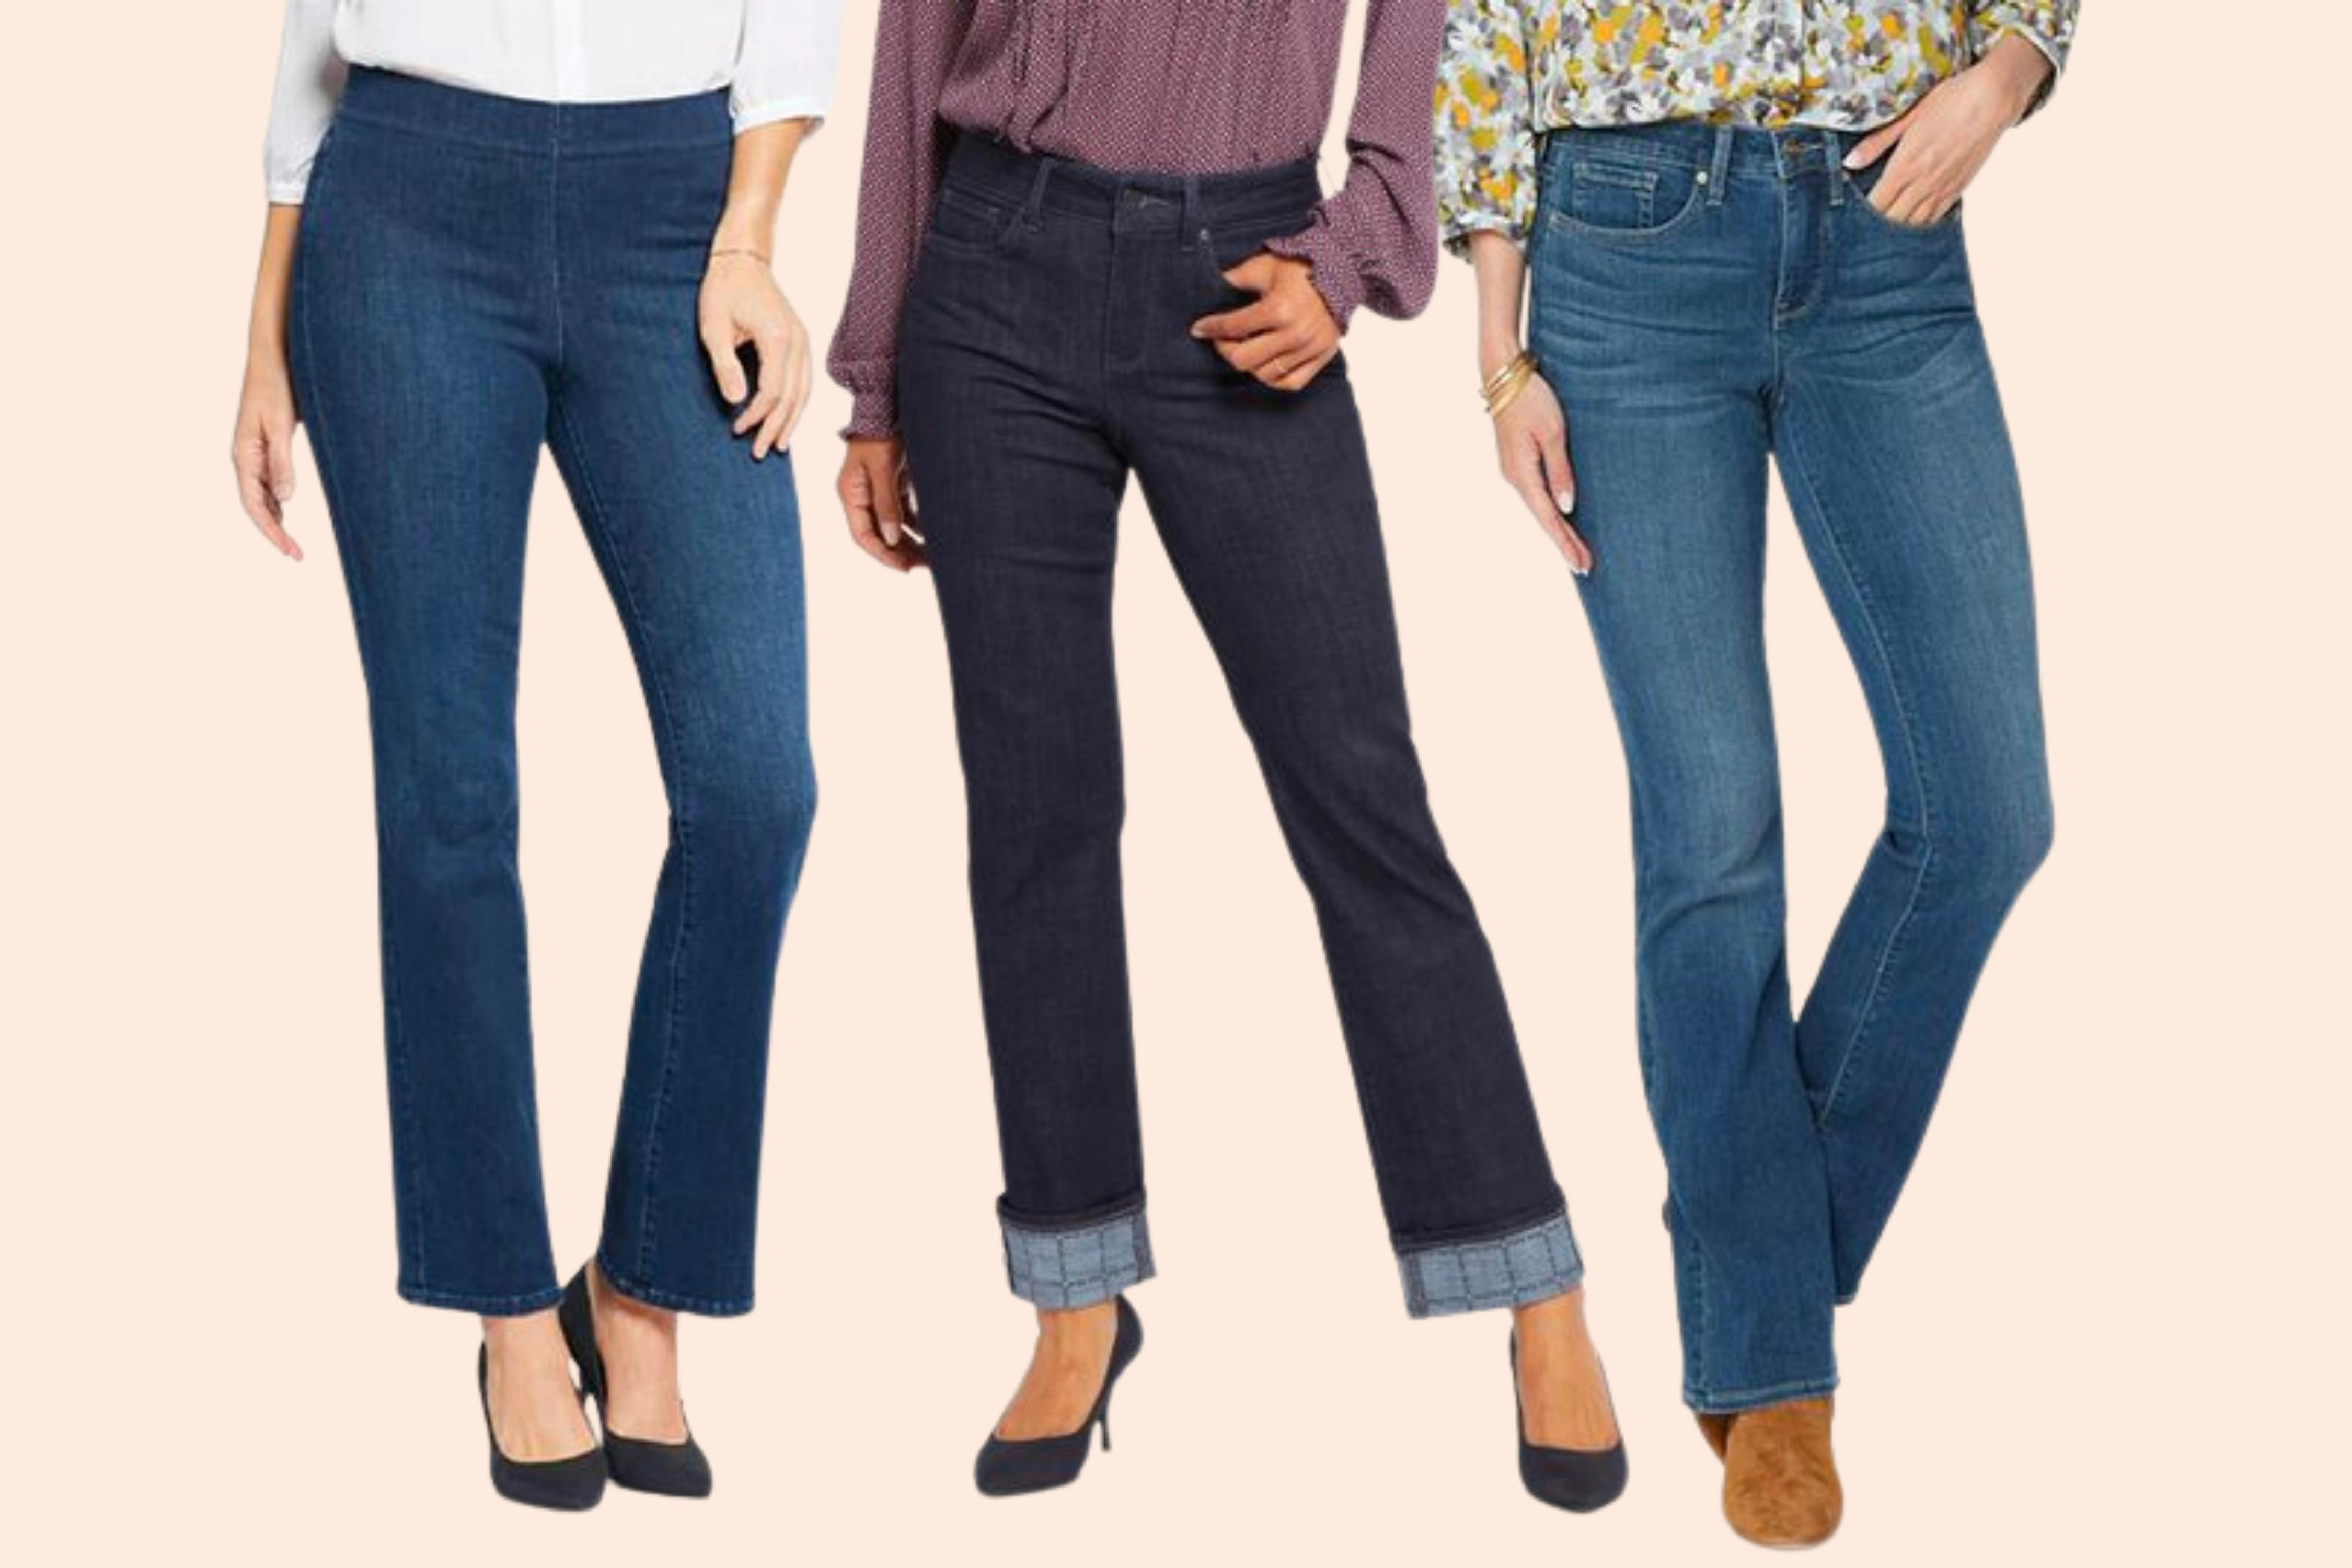 NYDJ Apparel, as Low as $27 at Zulily - The Krazy Coupon Lady